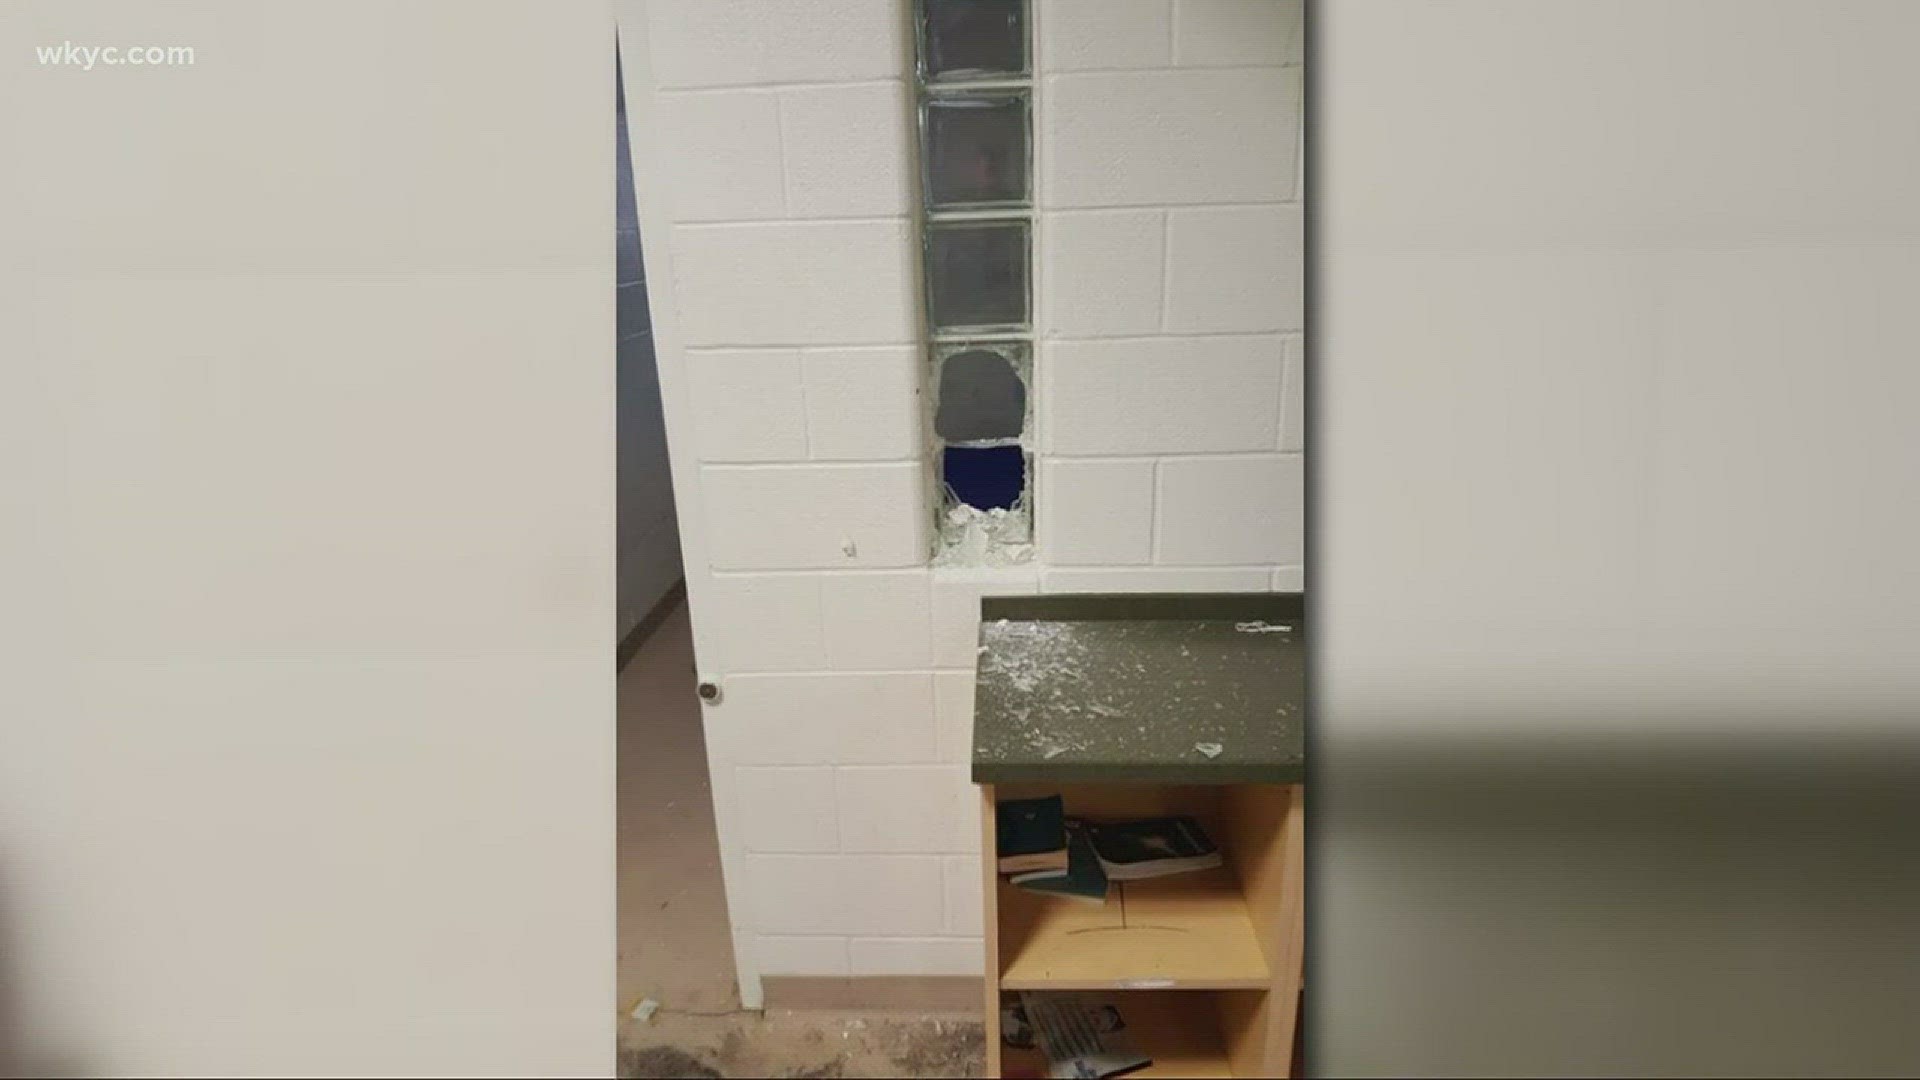 New photos show damage done during incident at Cuyahoga County Juvenile Detention Center